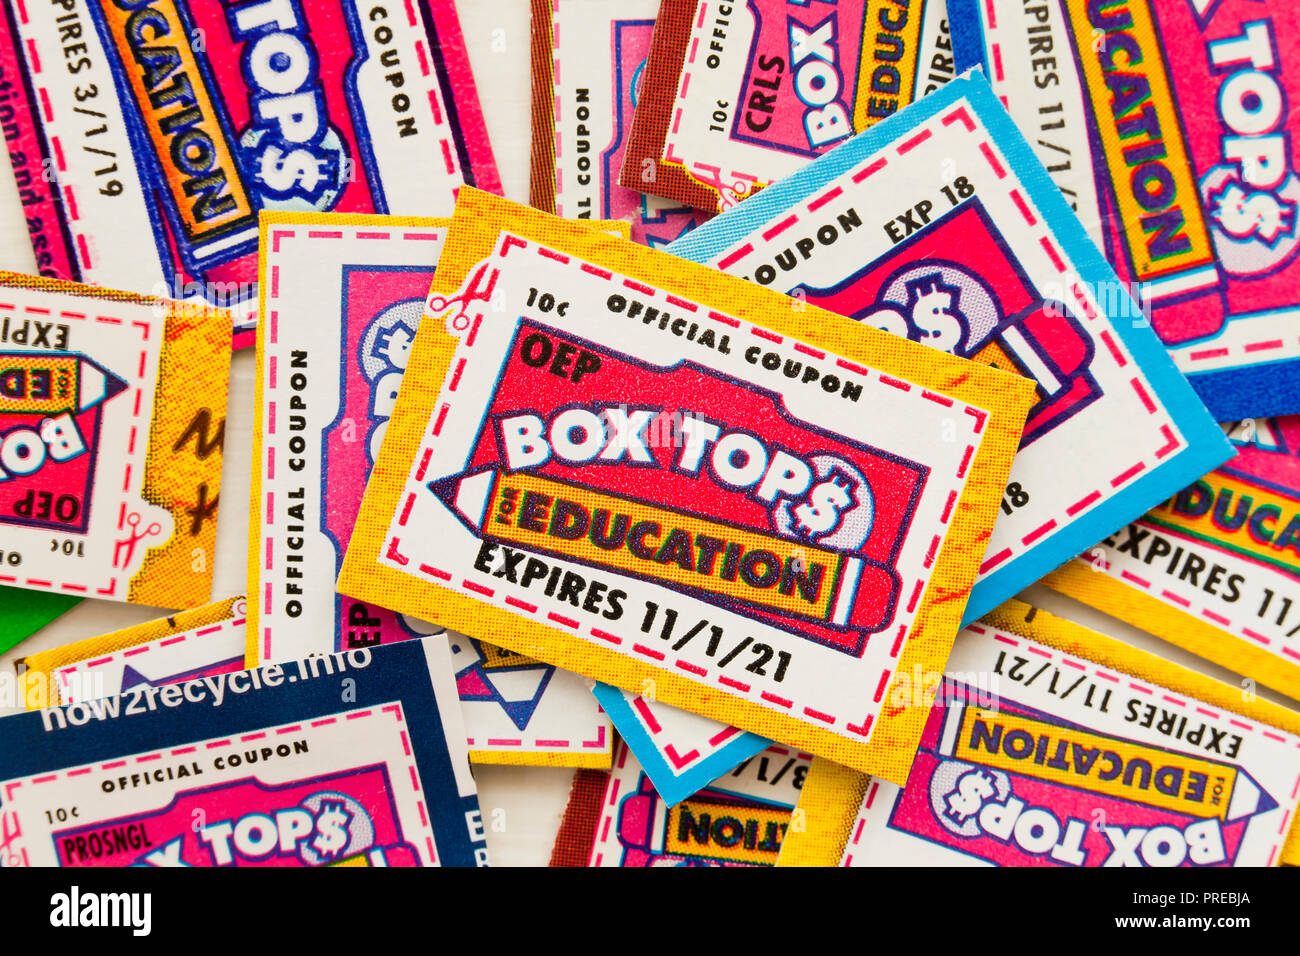 Box Tops for Education coupons - USA Stock Photo